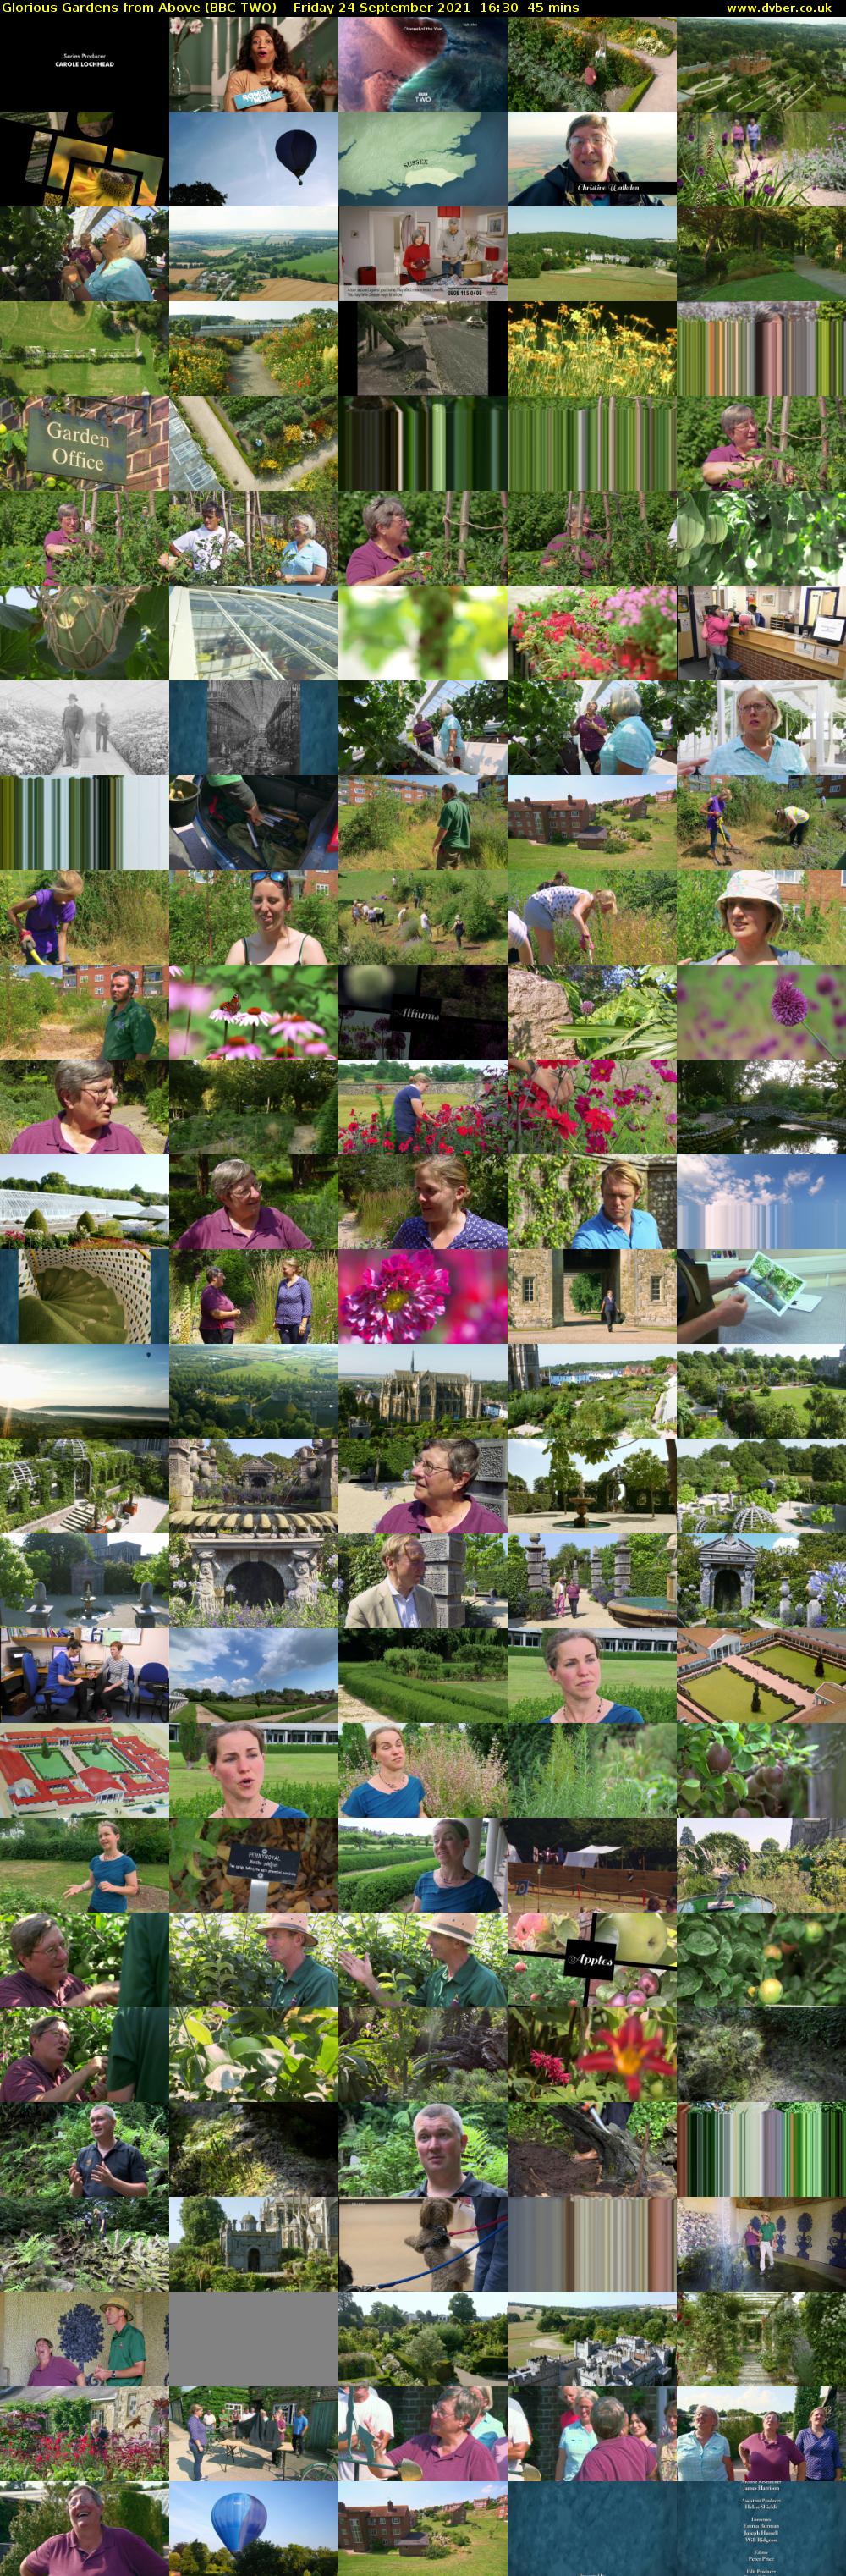 Glorious Gardens from Above (BBC TWO) Friday 24 September 2021 16:30 - 17:15